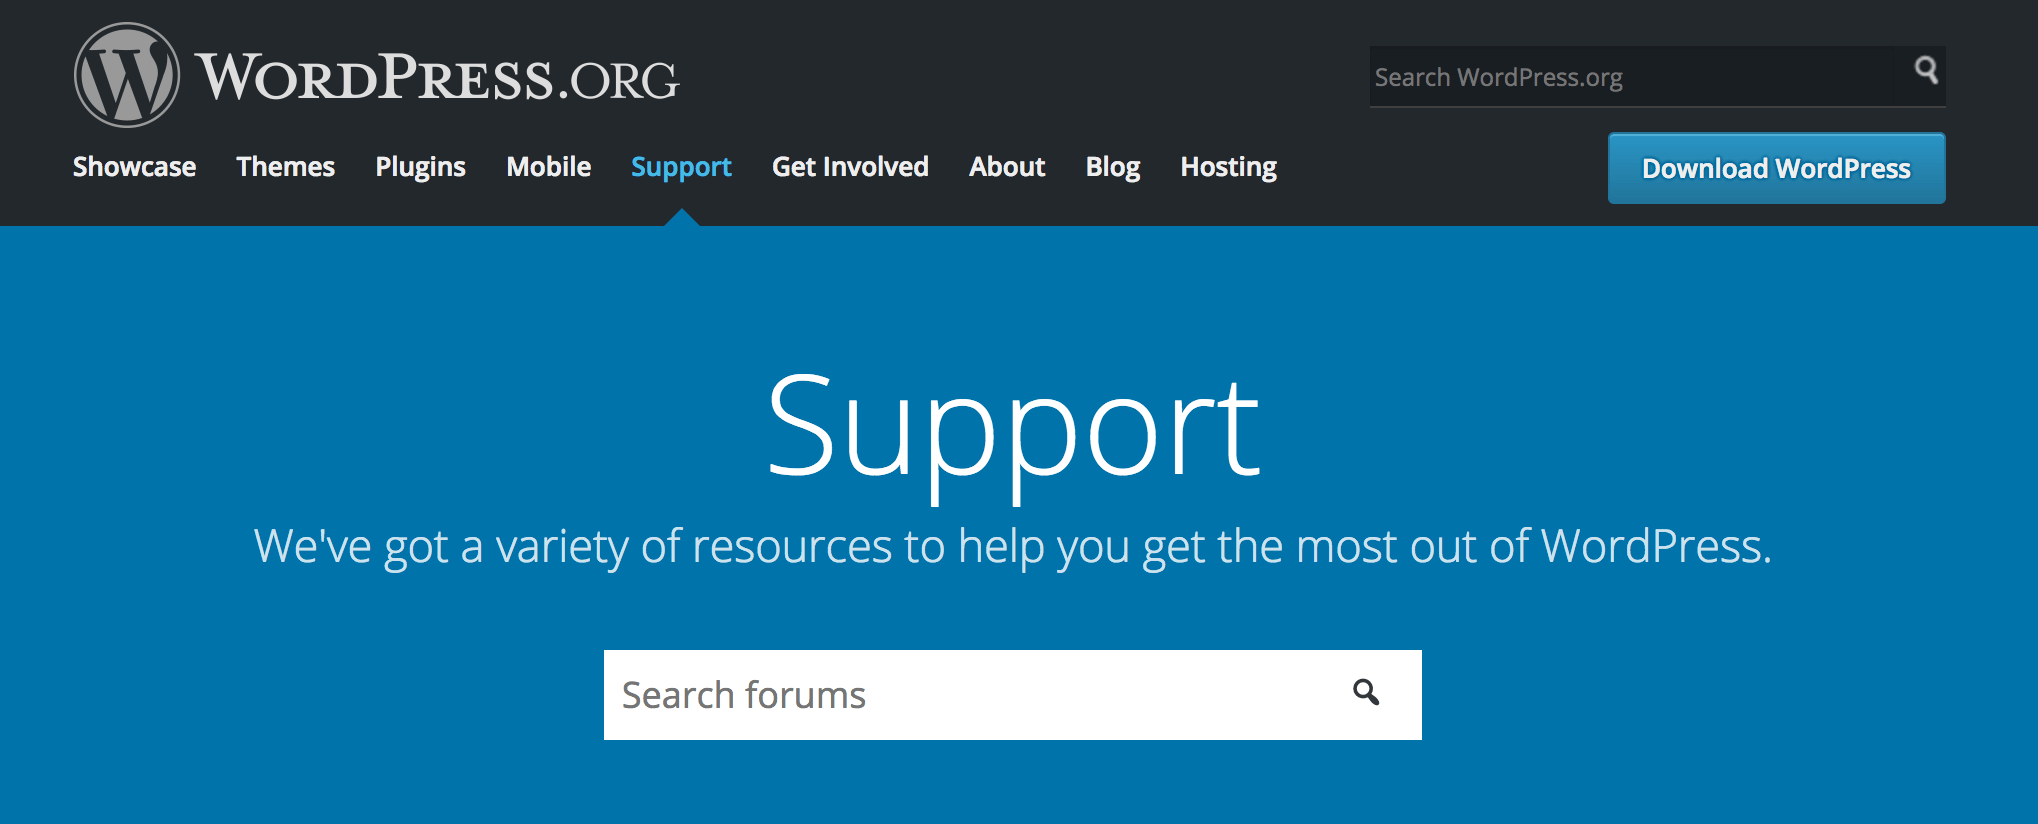 wordpress.org support knowledge base